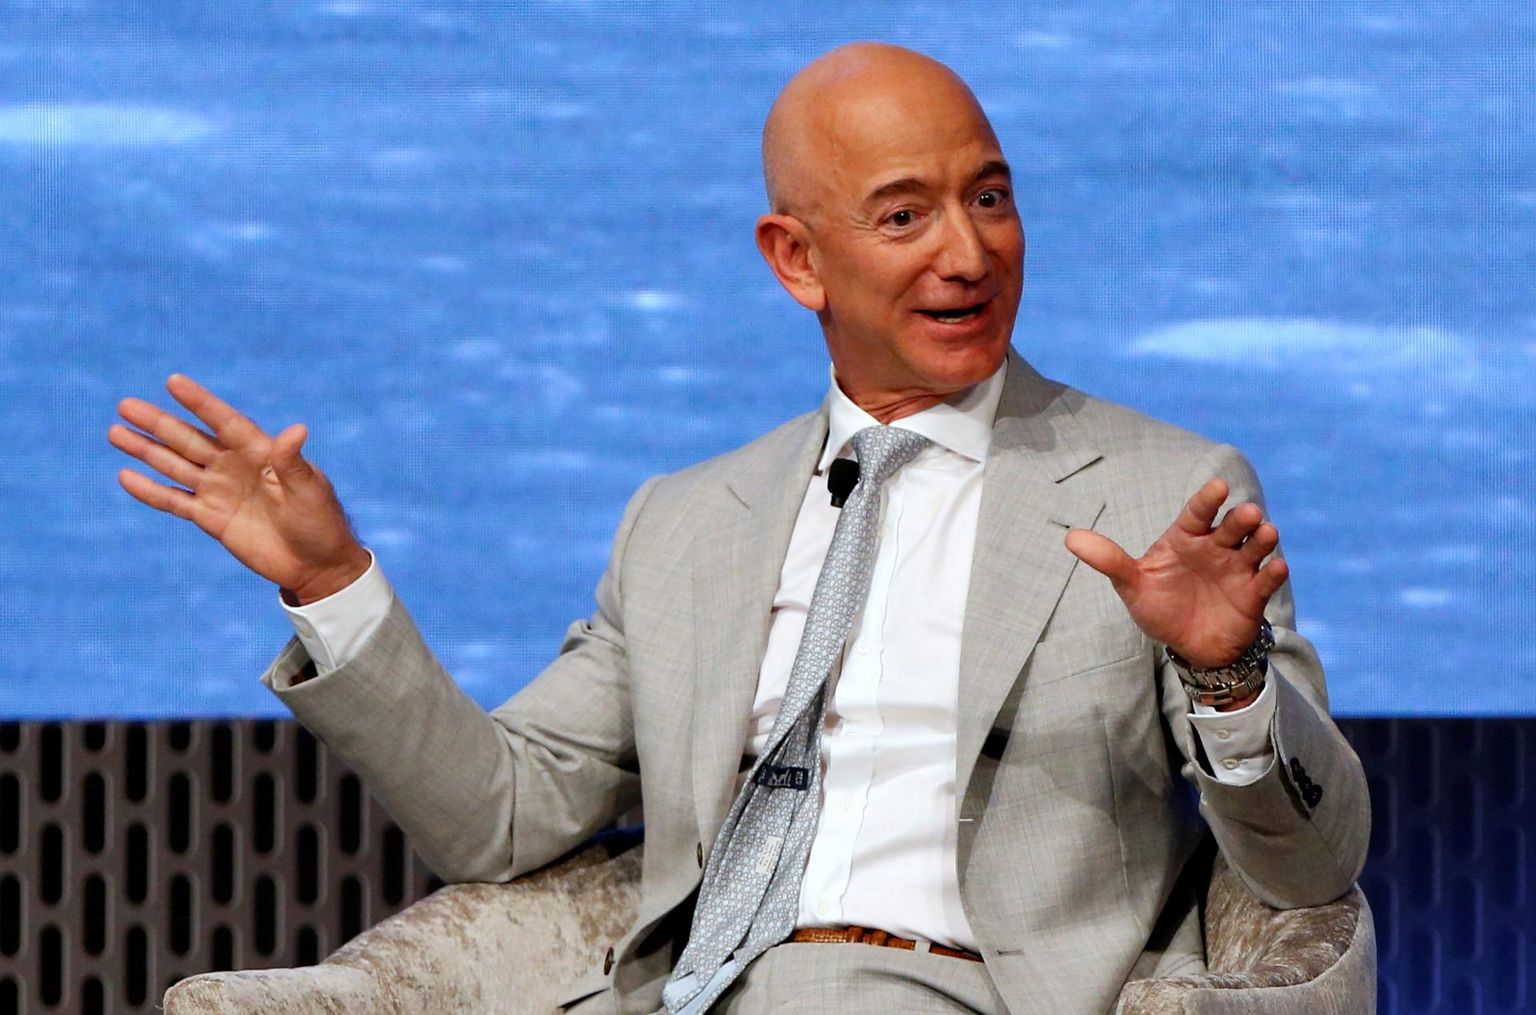 FILE PHOTO: Jeff Bezos, founder of Amazon and Blue Origin speaks at the John F. Kennedy Library in Boston, Massachusetts, U.S., June 19, 2019. REUTERS/Katherine Taylor/File Photo FOTO: Katherine Taylor/Reuters